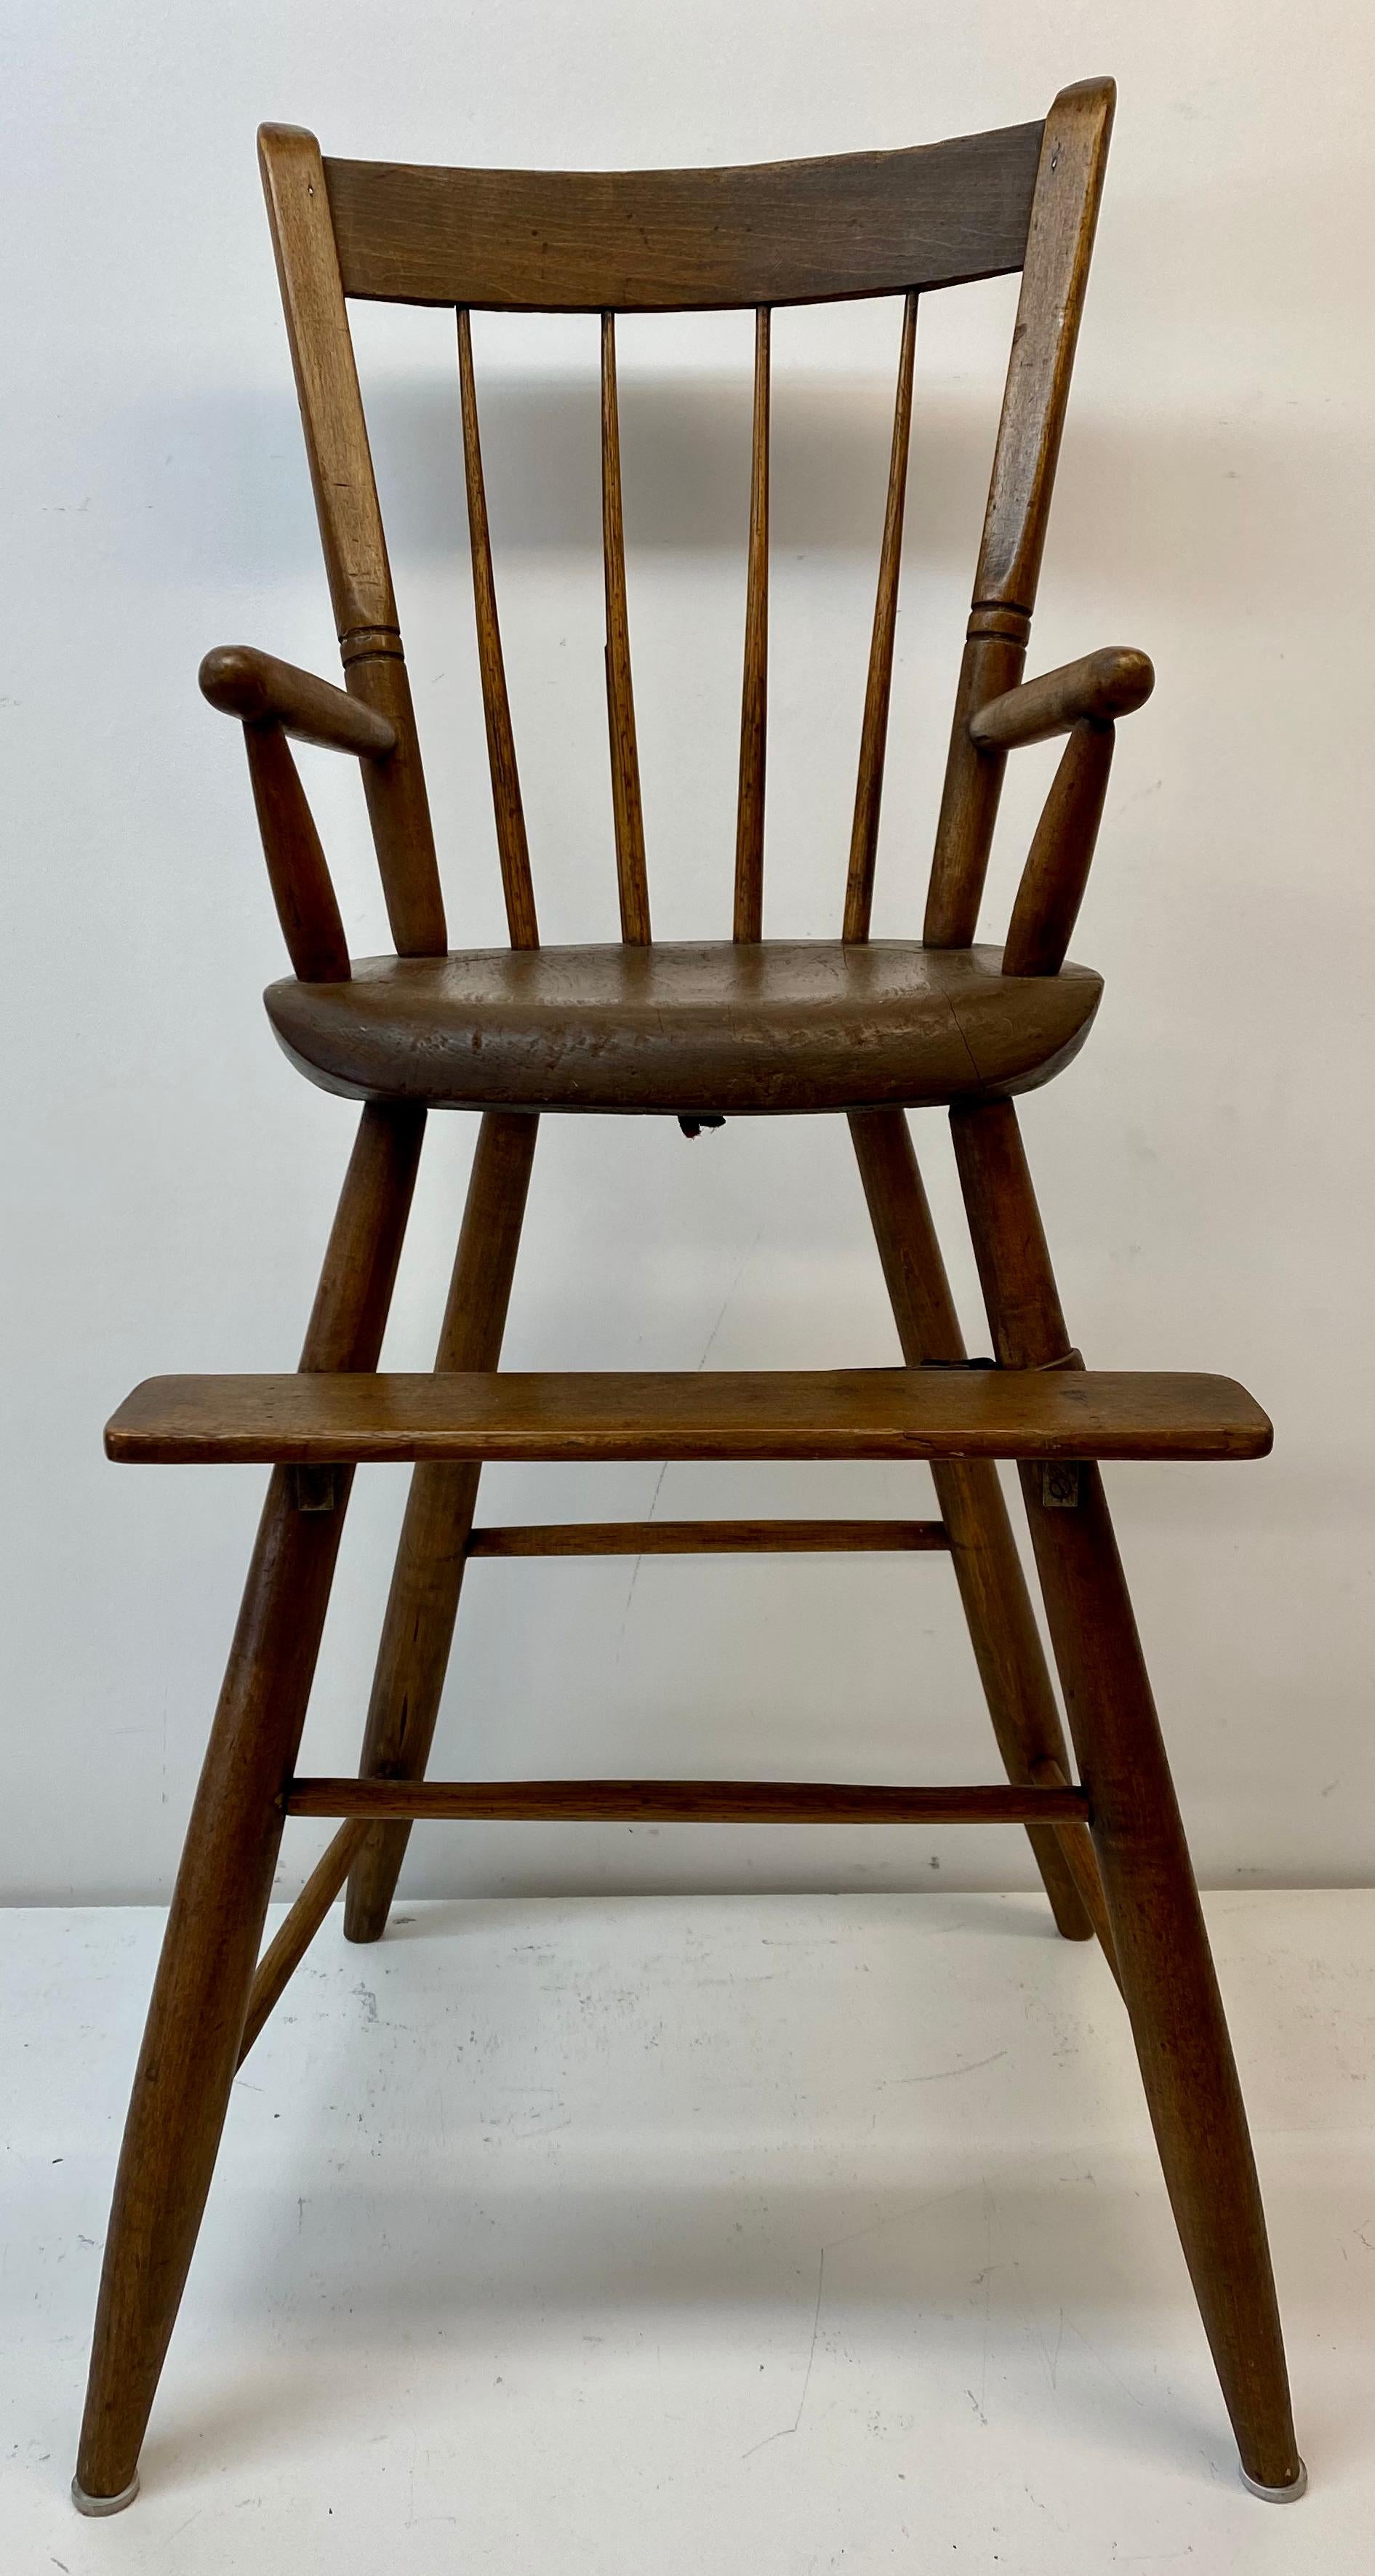 Antique 18th to 19th century American child's high chair

Outstanding hand crafted high chair

Measures: 19